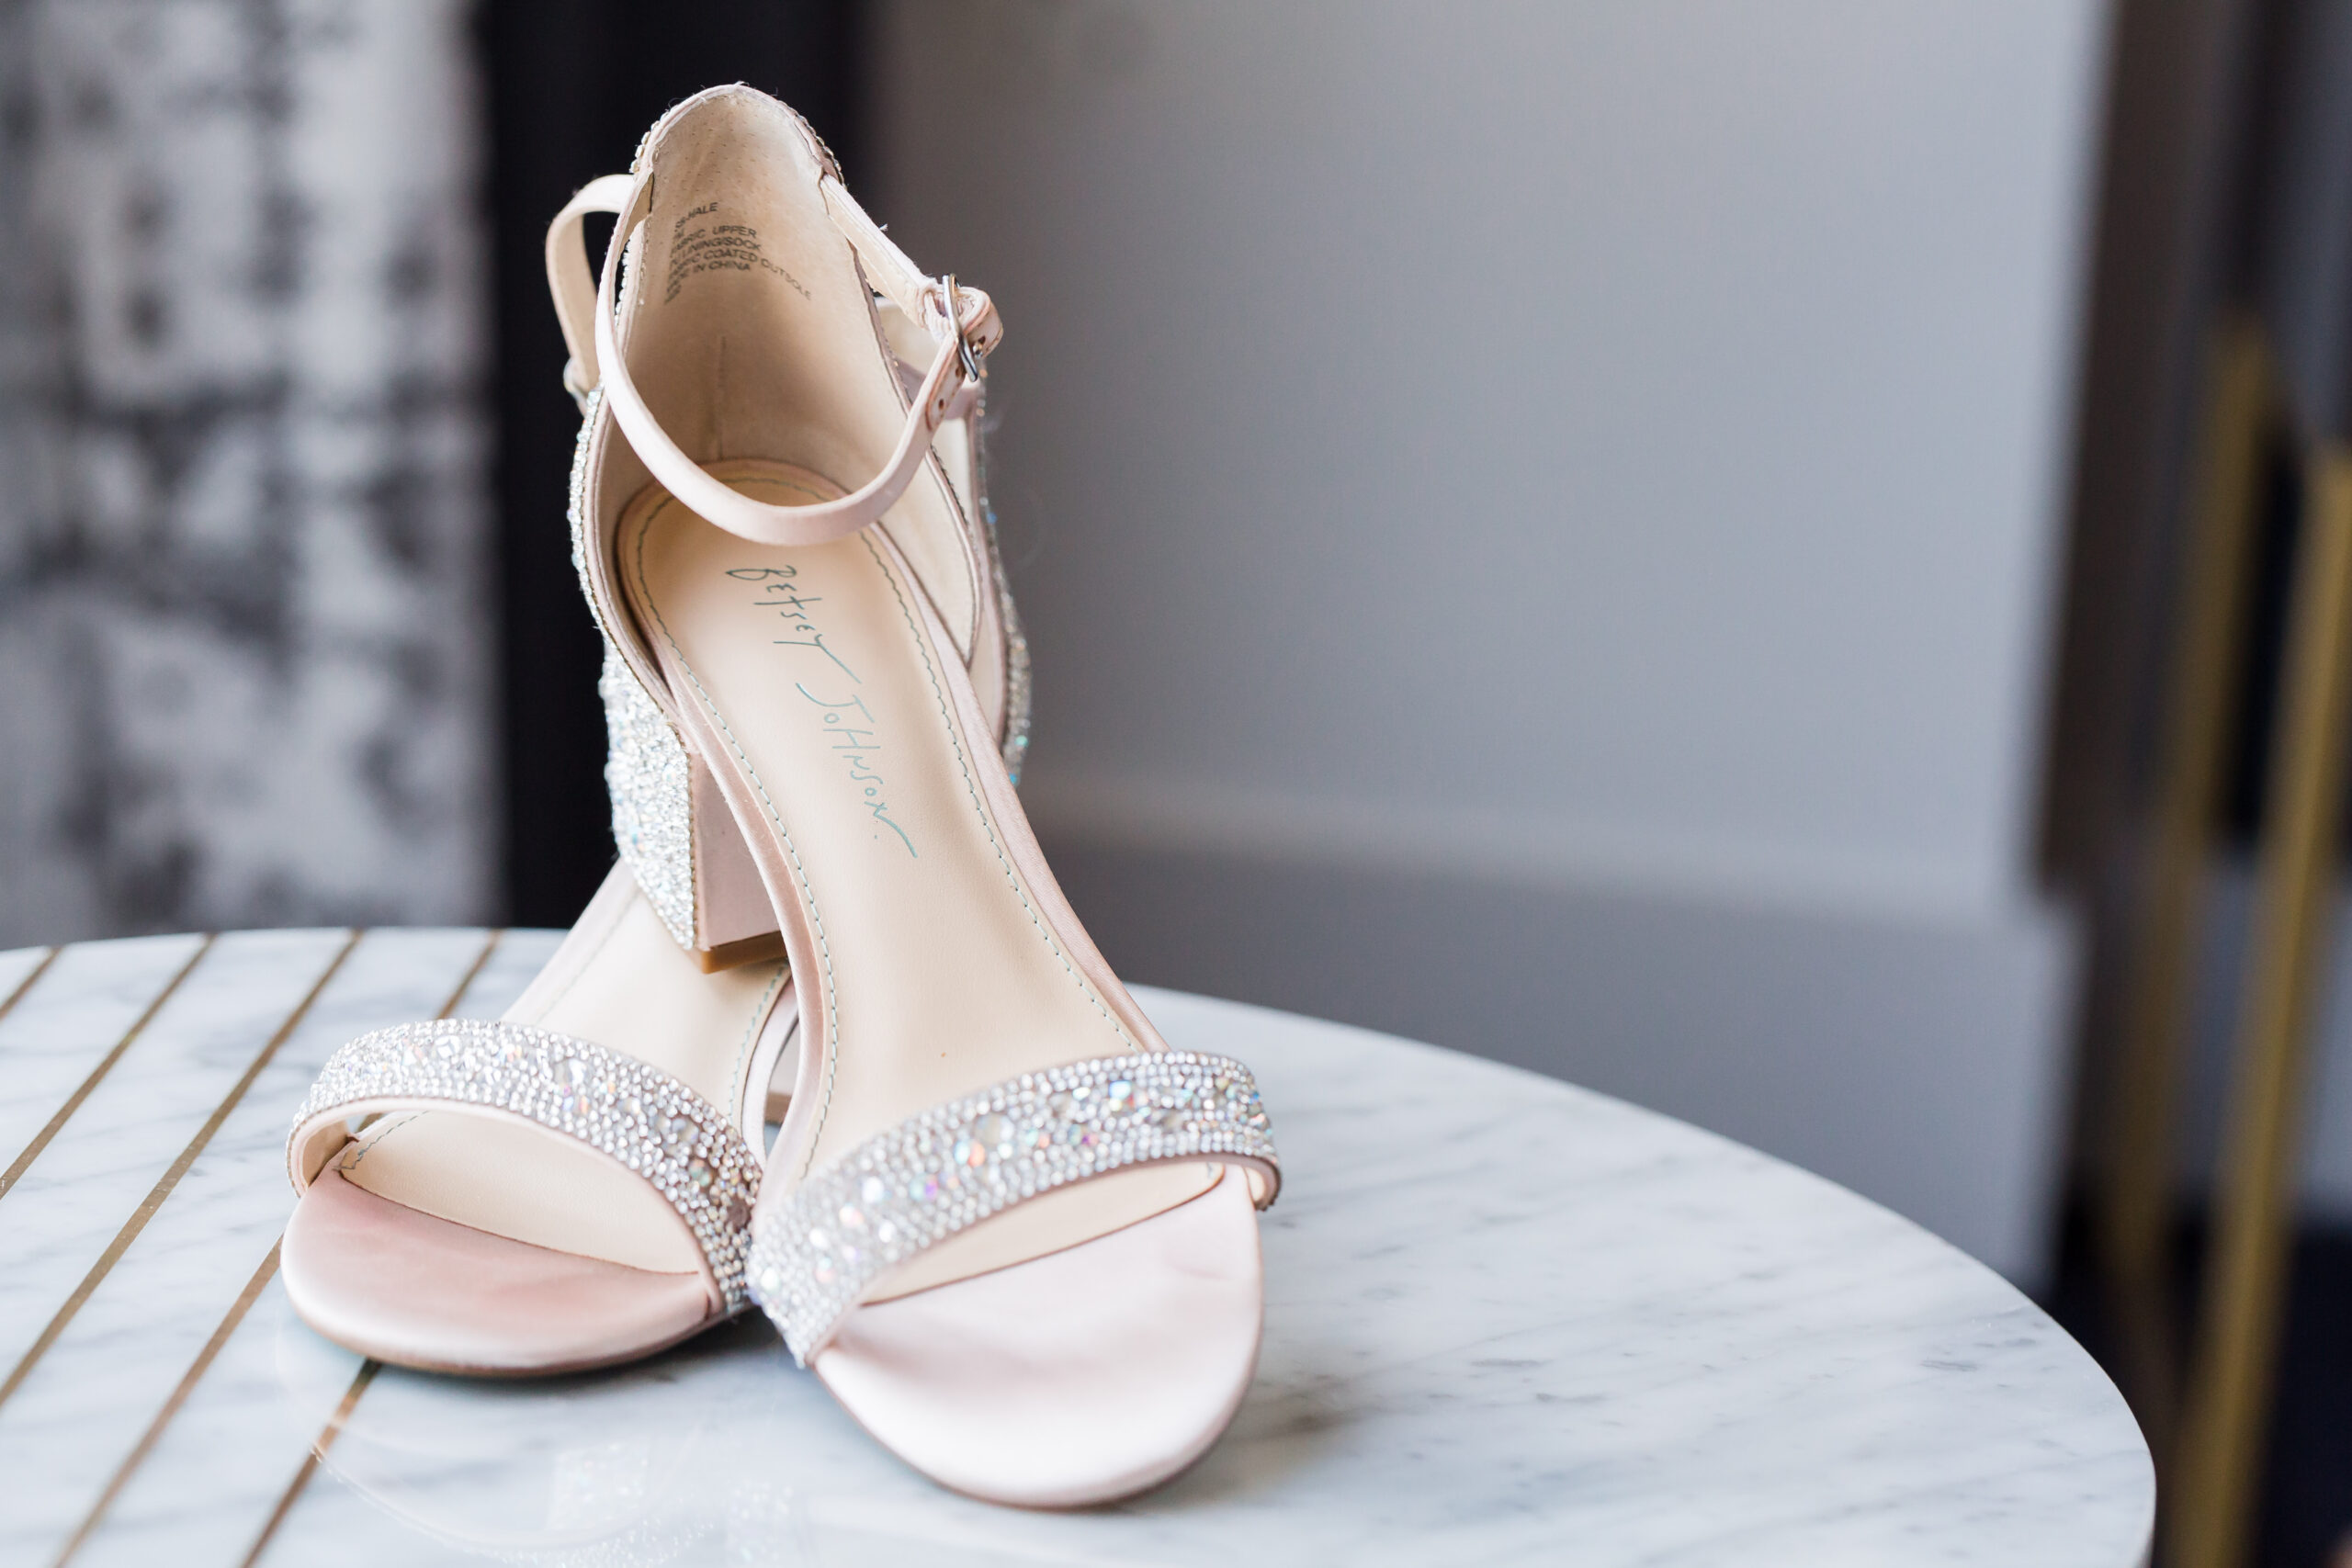 Bridal shoes in light brown color embellished with crystals